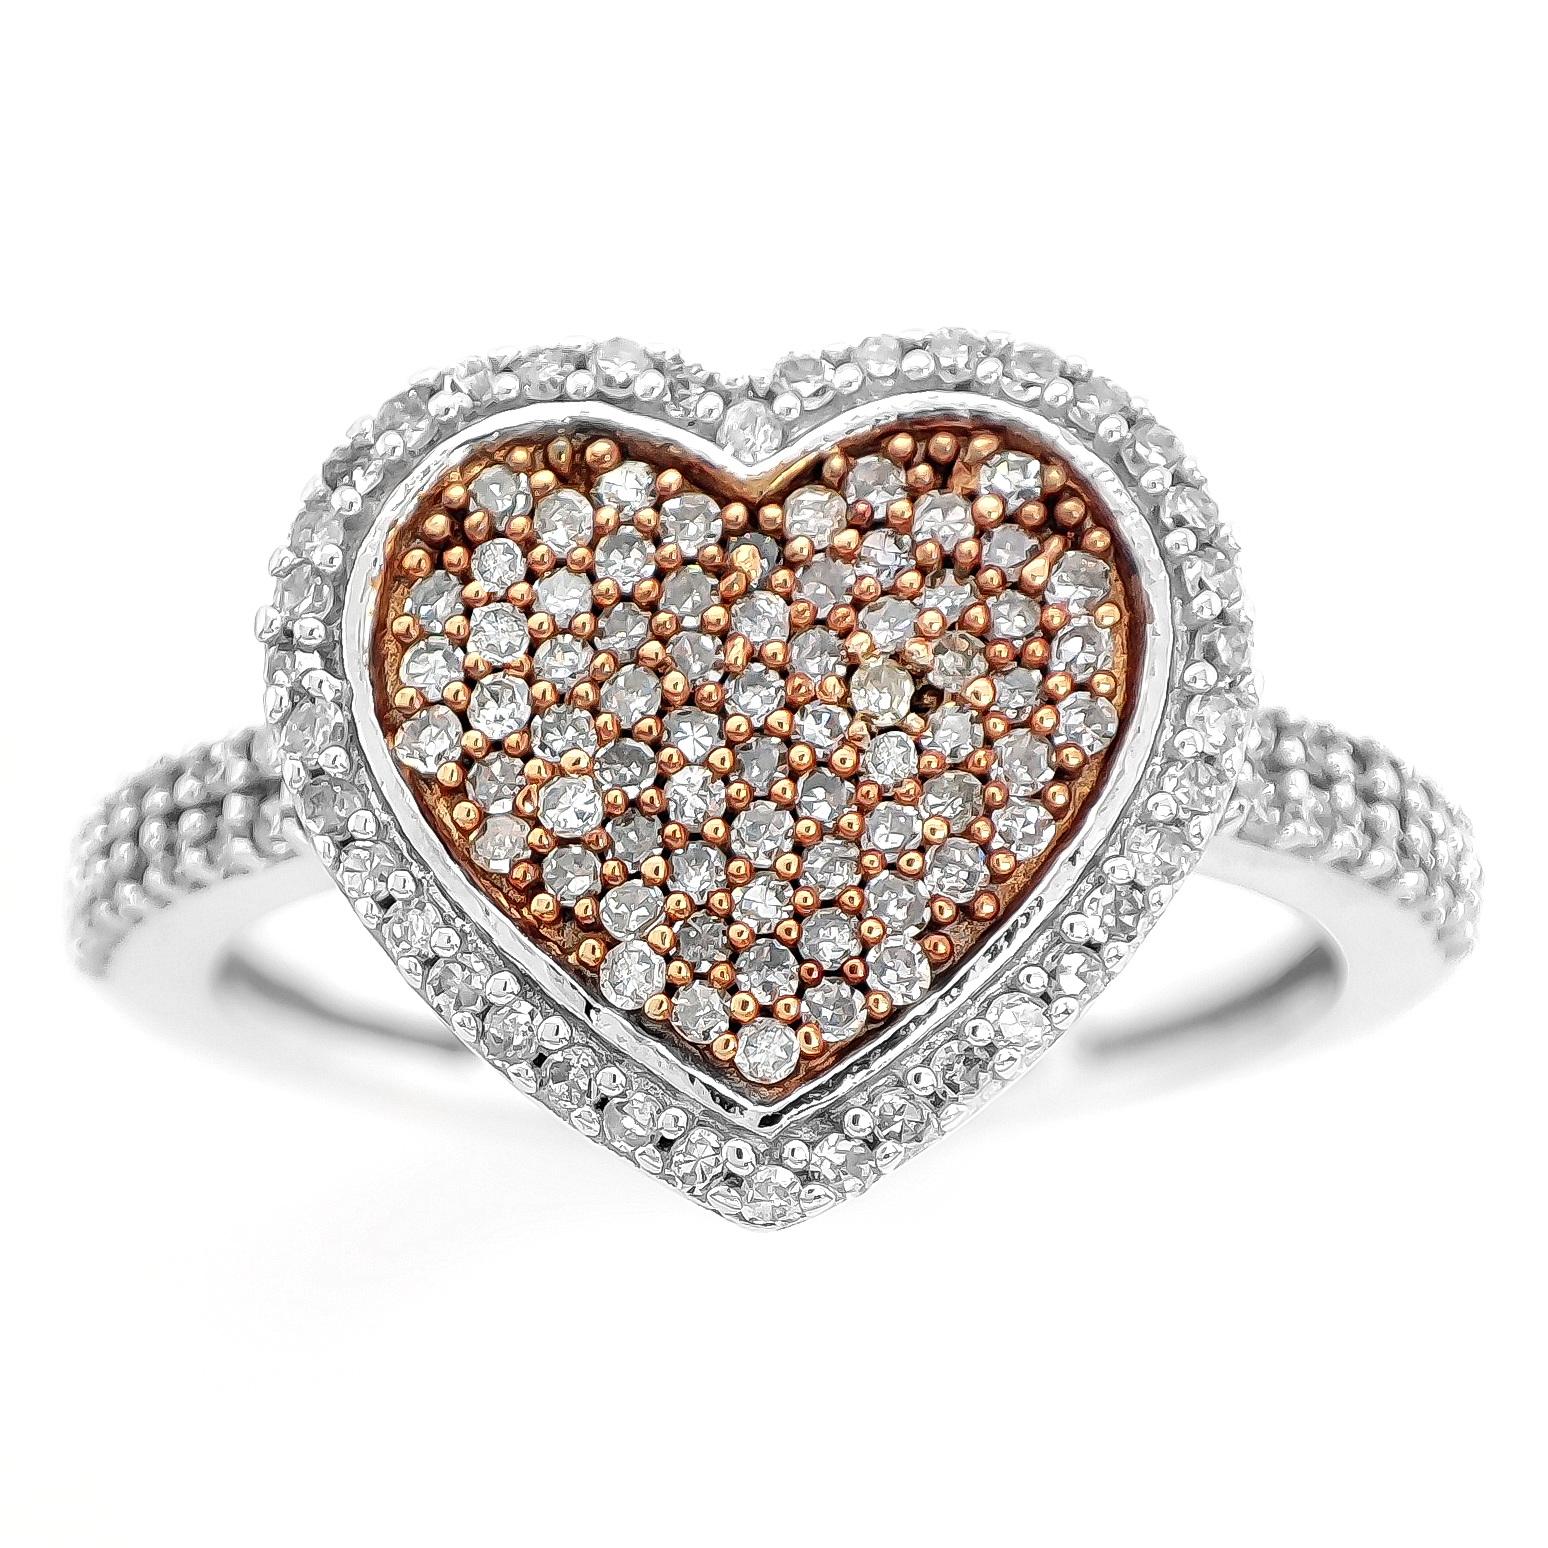 FOR US CUSTOMER NO VAT!

The centerpiece of the ring is adorned with 72 light gray diamonds, totaling 0.25 carats, which create a mesmerizing and distinctive look. Surrounding this central design are an additional 62 light gray diamonds, totaling